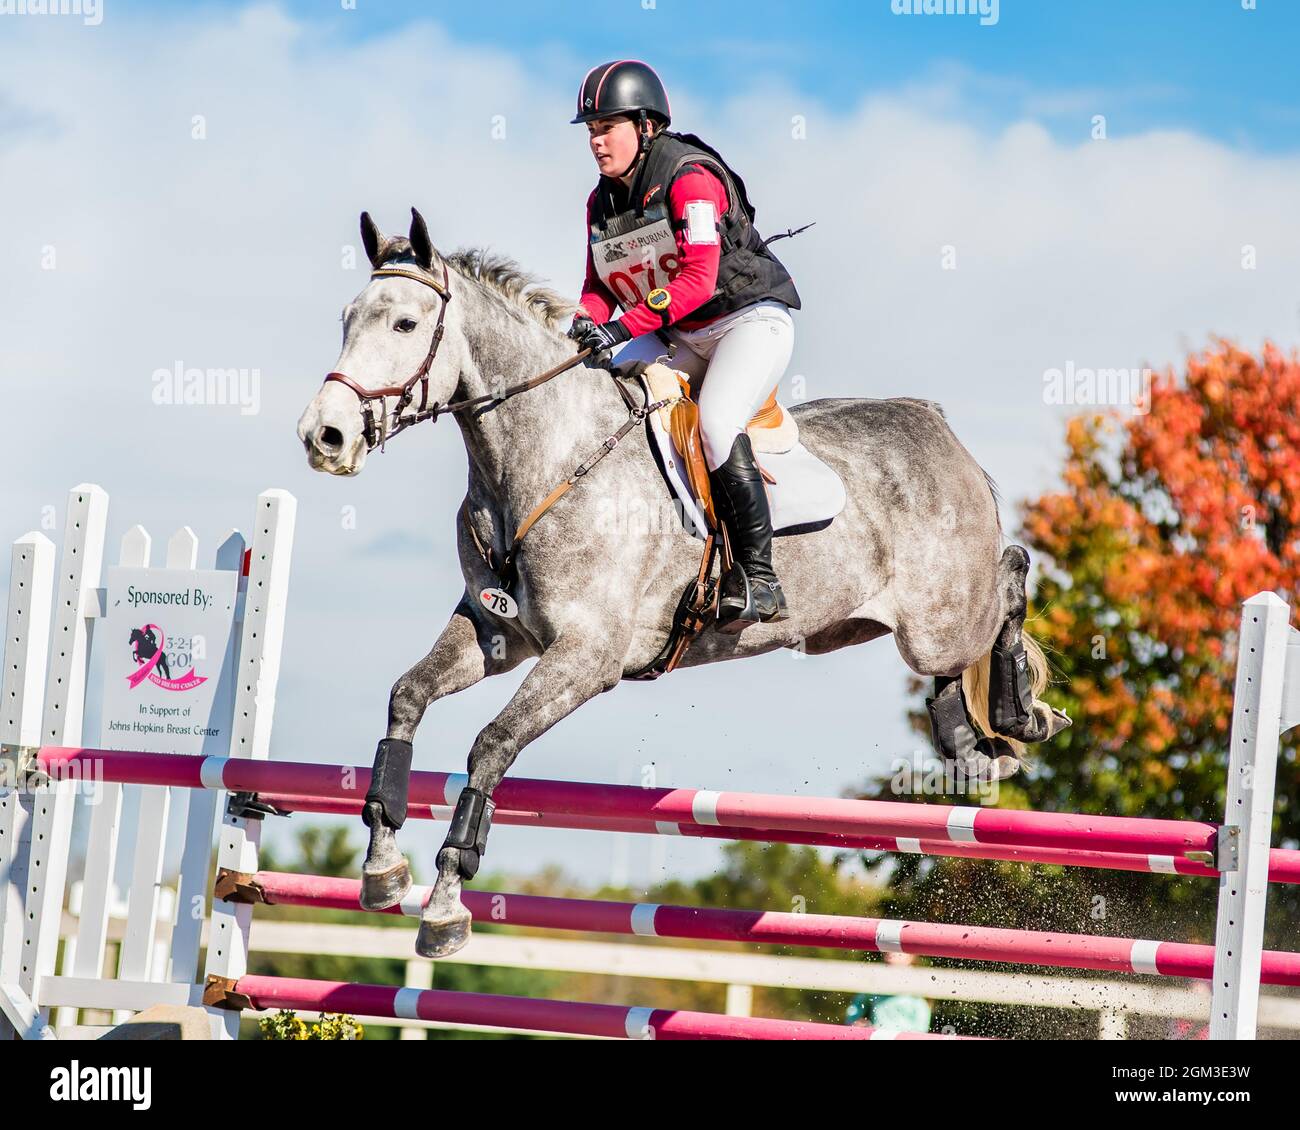 Equestrian competition photos including hunter jumper and cross country horse riders Stock Photo